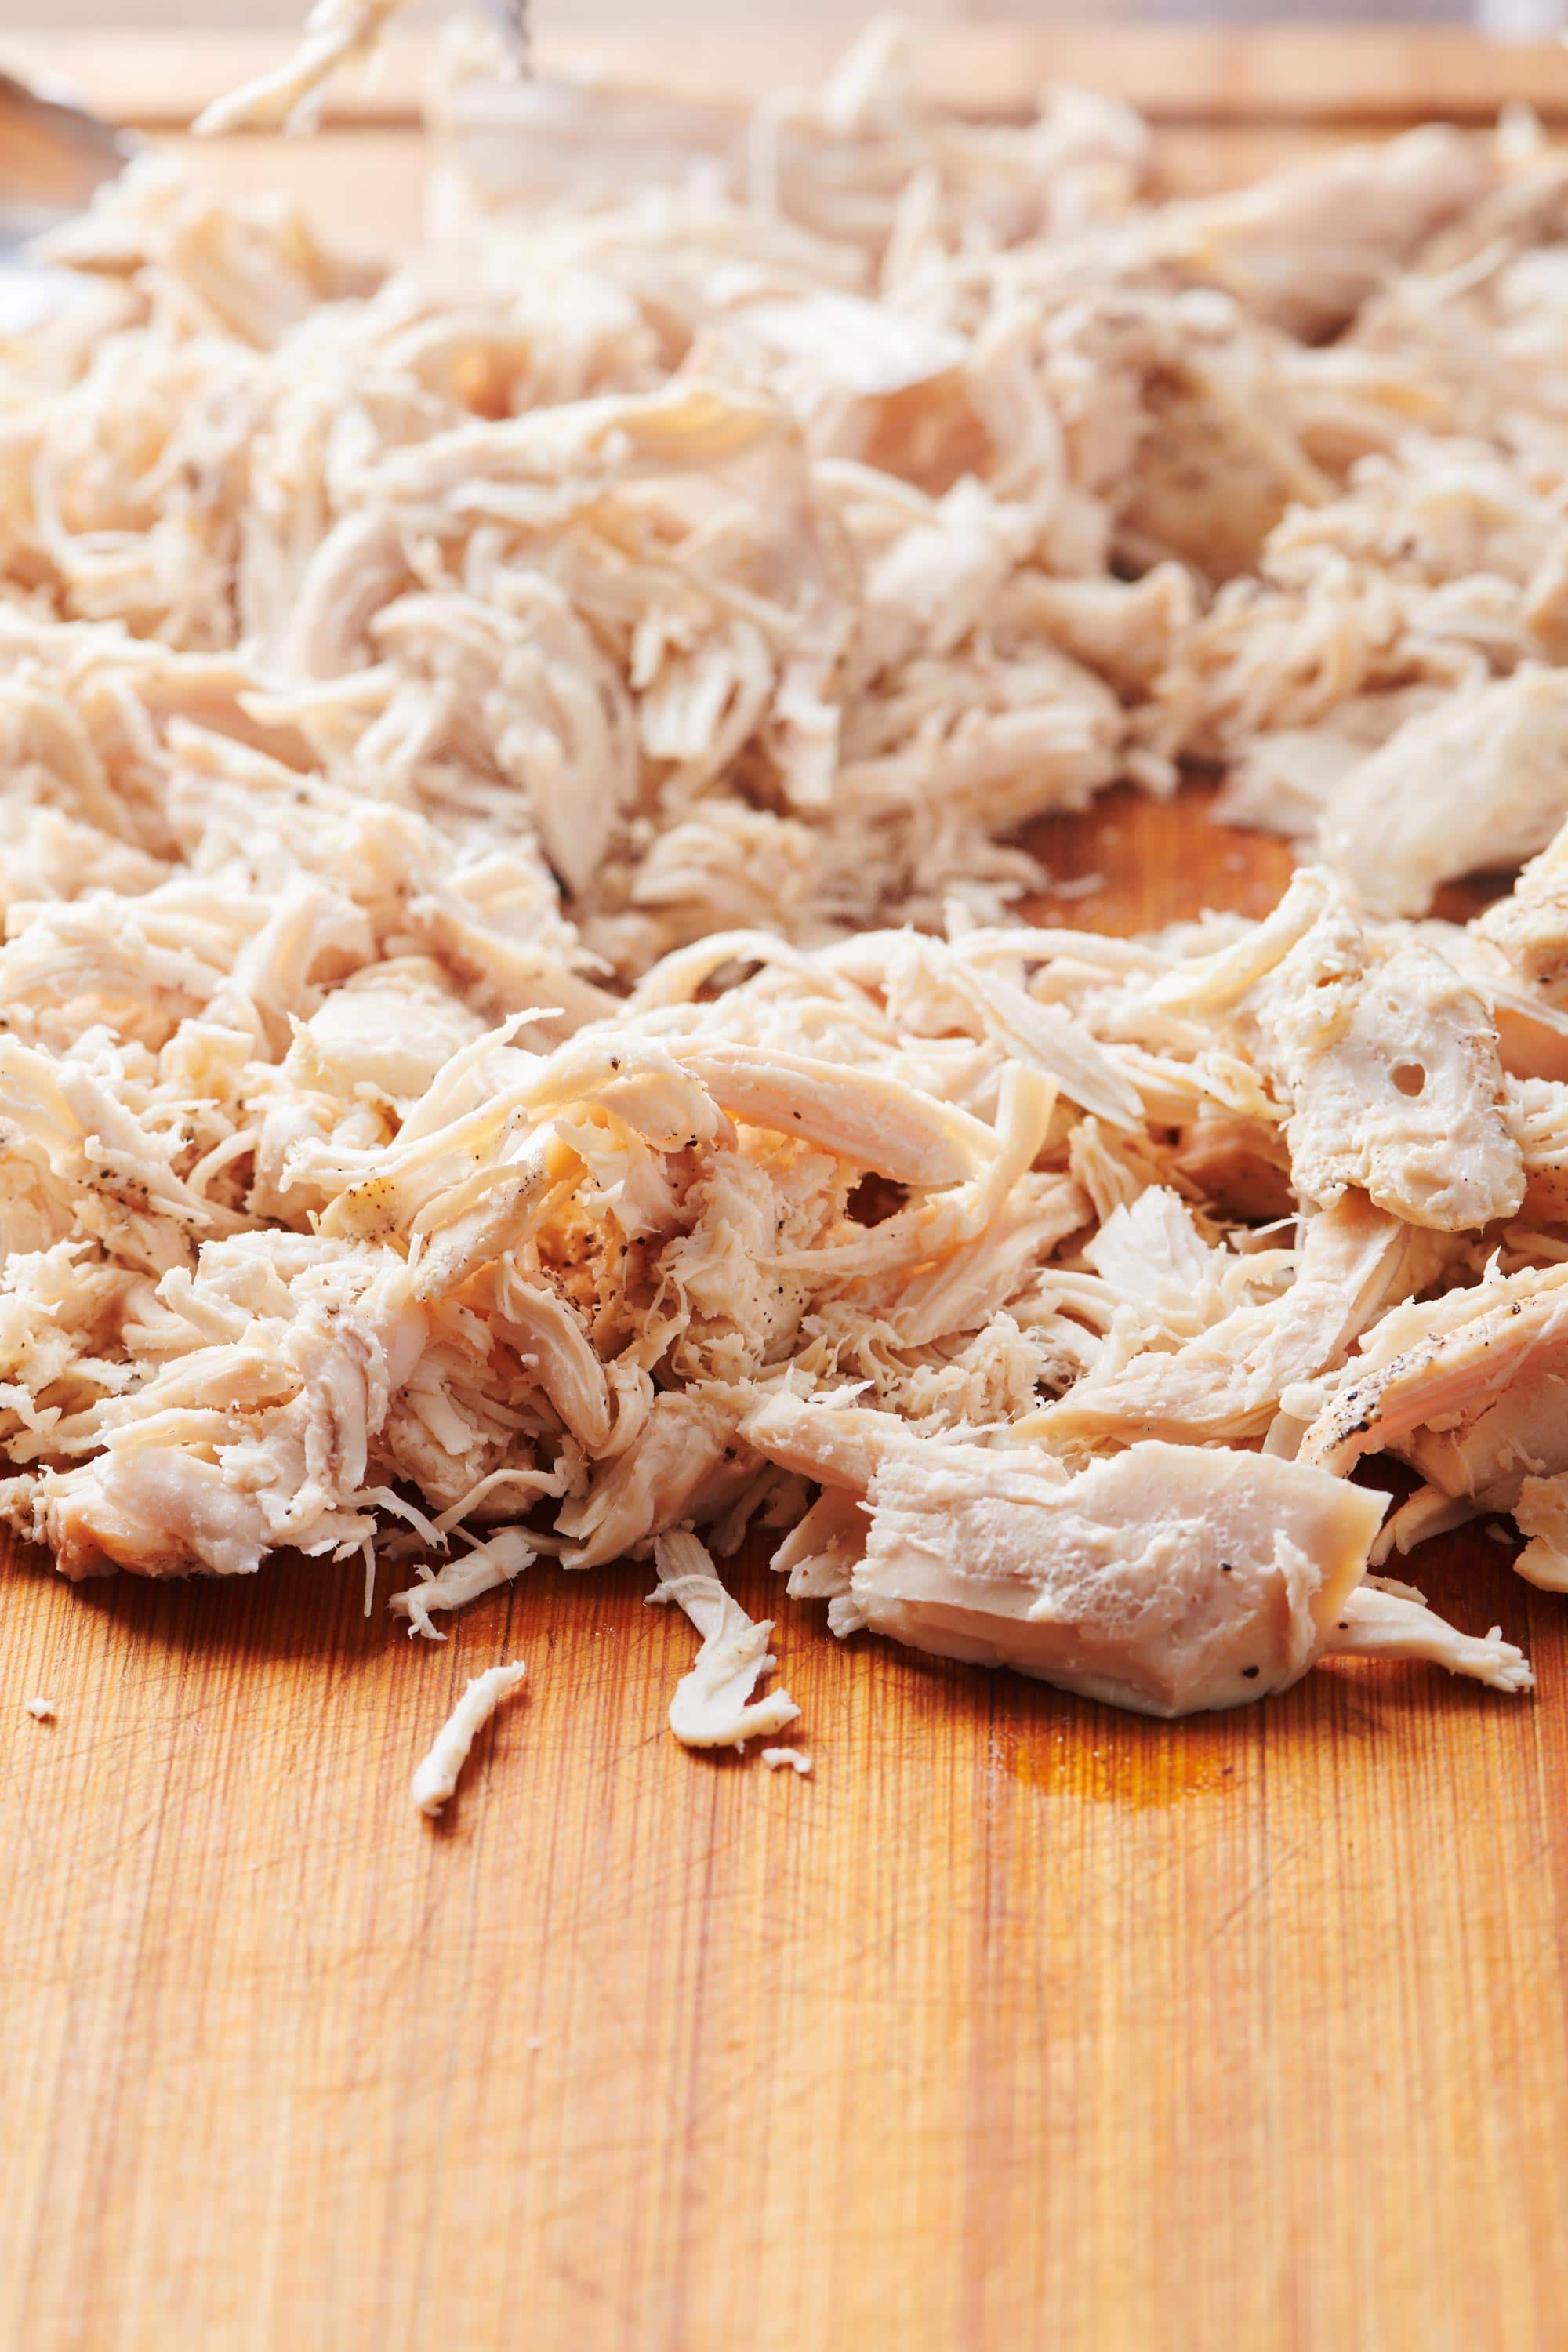 Shredded chicken on a wooden surface.